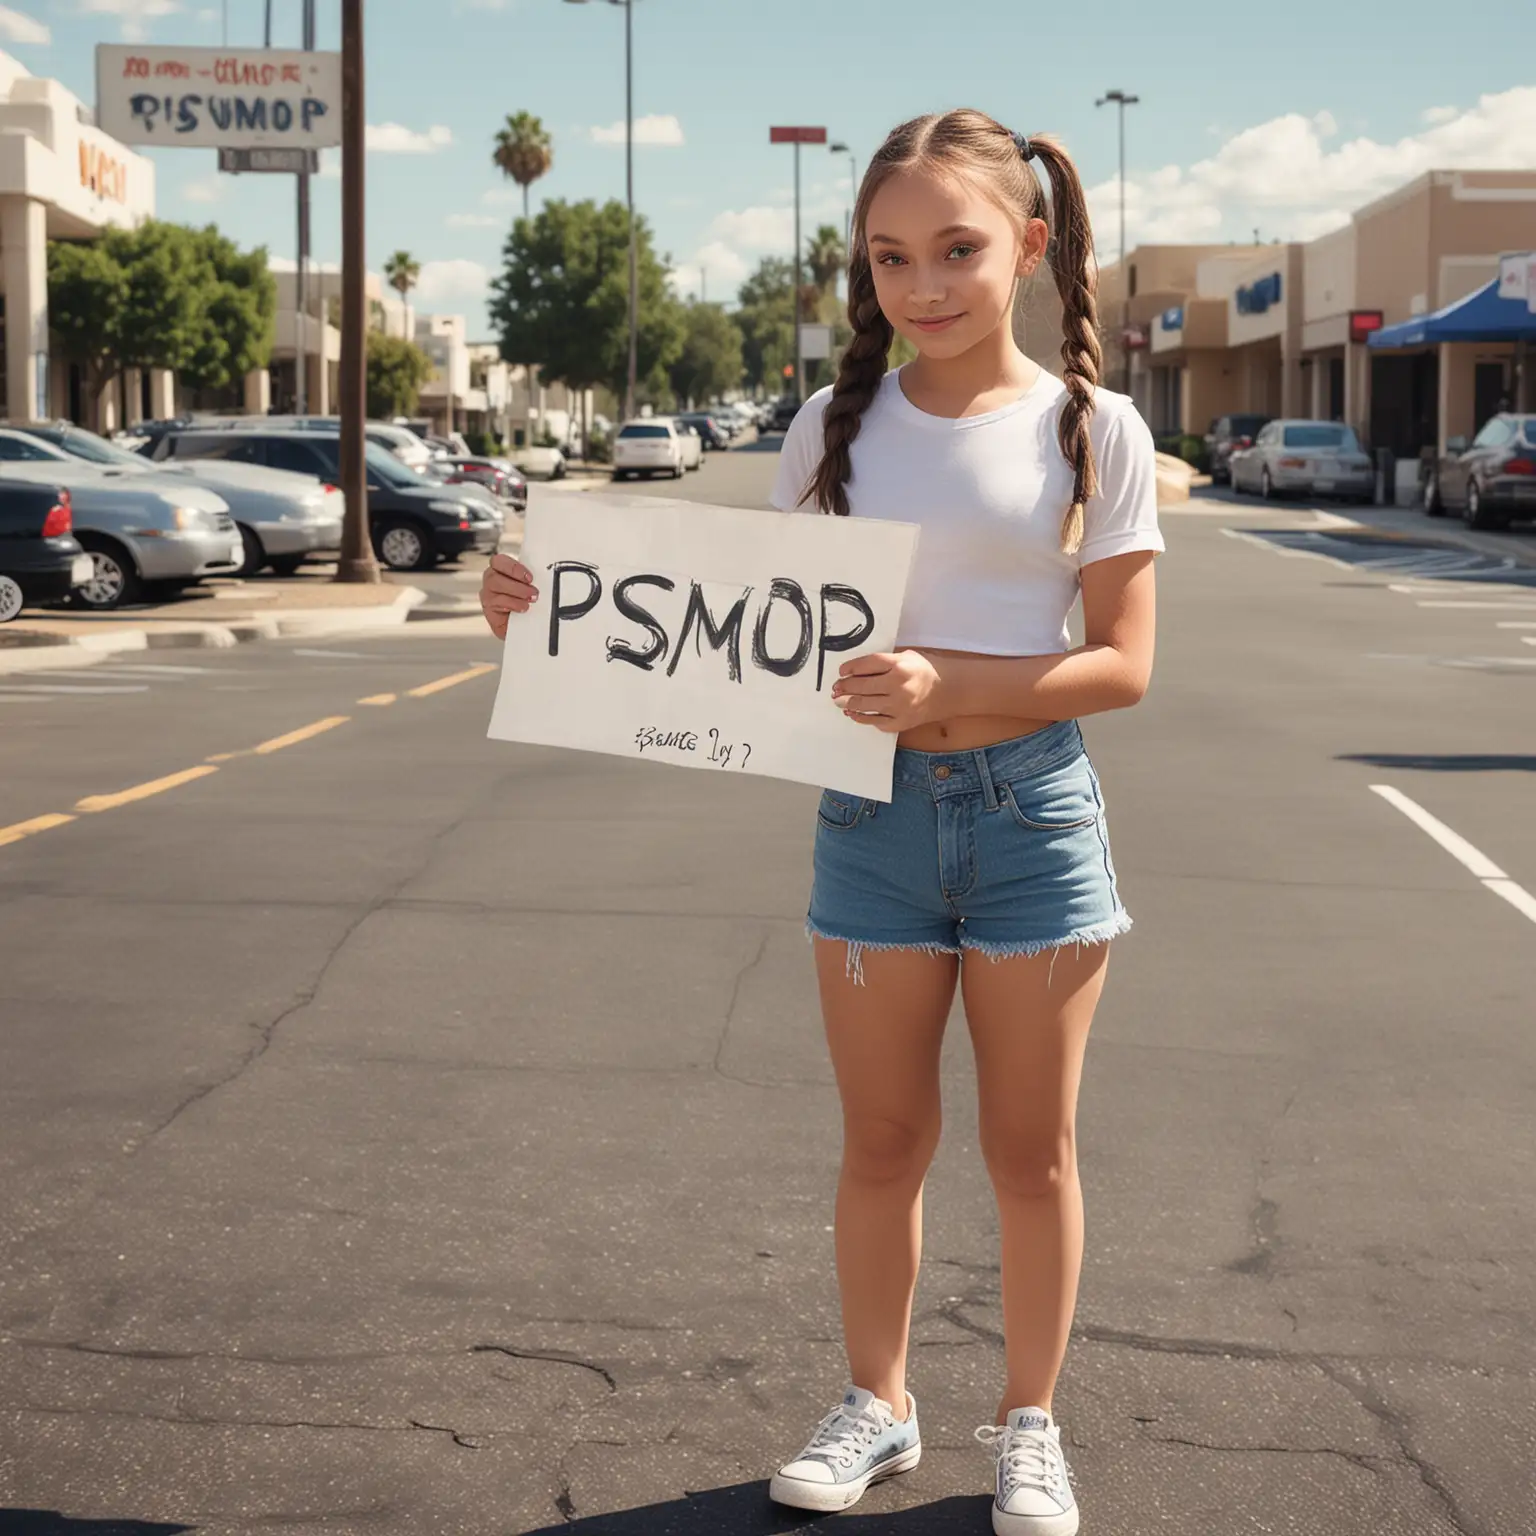 Photorealistic, young maddie ziegler, pigtails, hot summer day, denim shorts, on a parking lot, holding a sign that reads "Pismop"